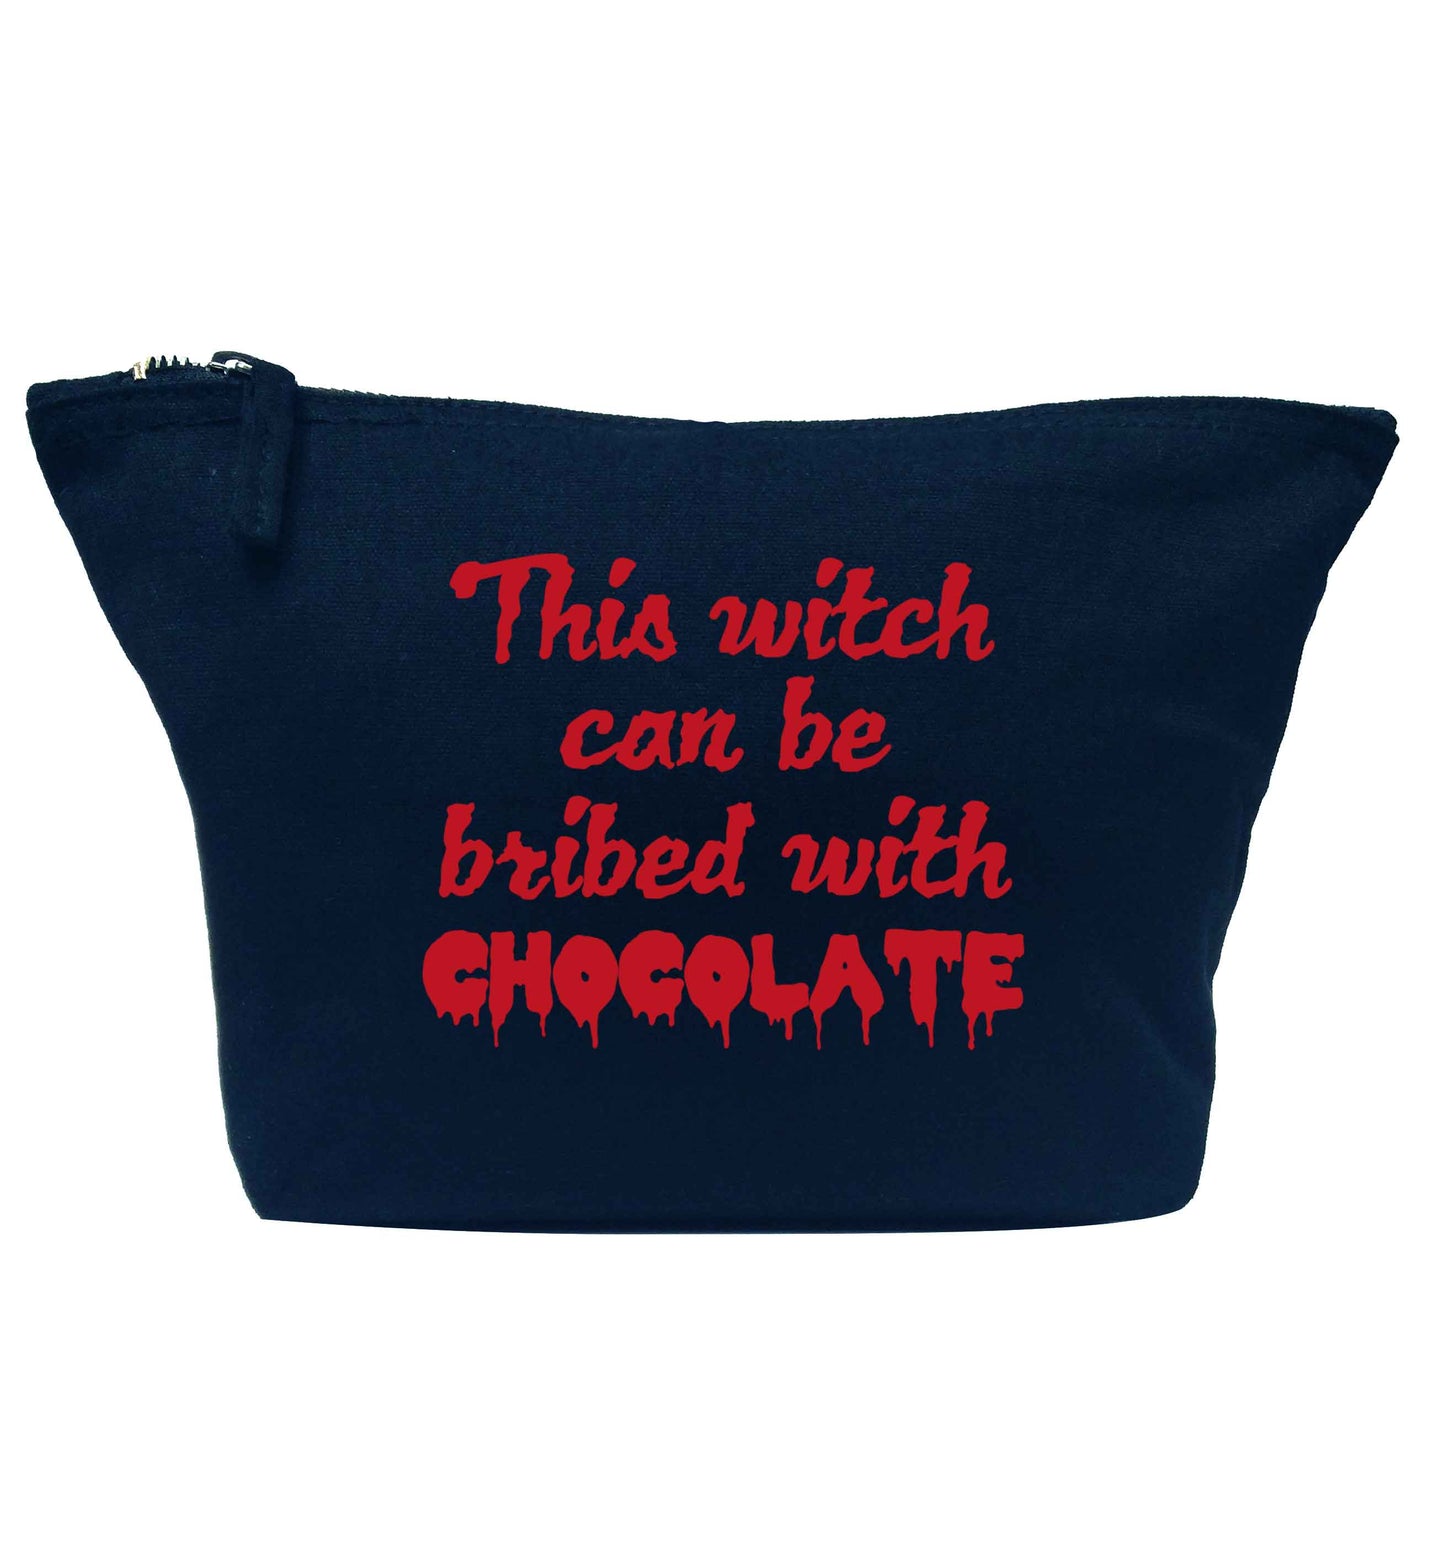 This witch can be bribed with chocolate navy makeup bag